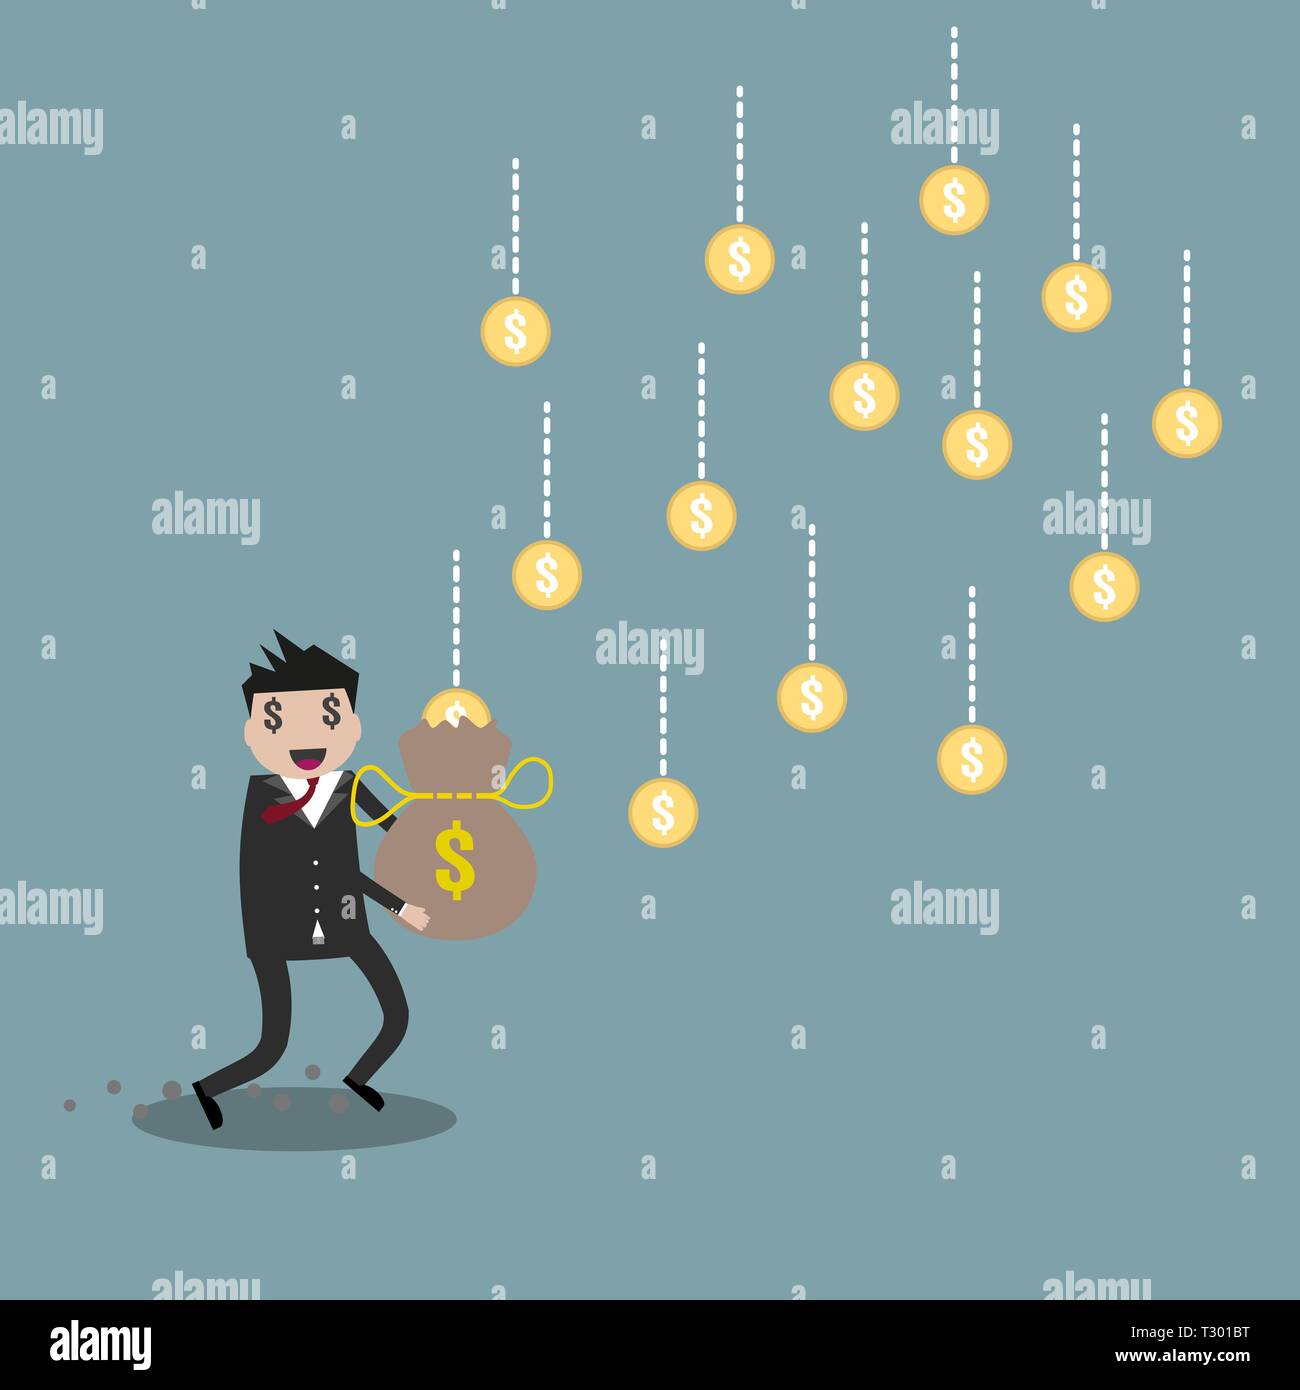 Cartoon businessman gather falling gold coins from sky to money bag. vector illustration in flat design on grey background. Financials, work motivatio Stock Vector